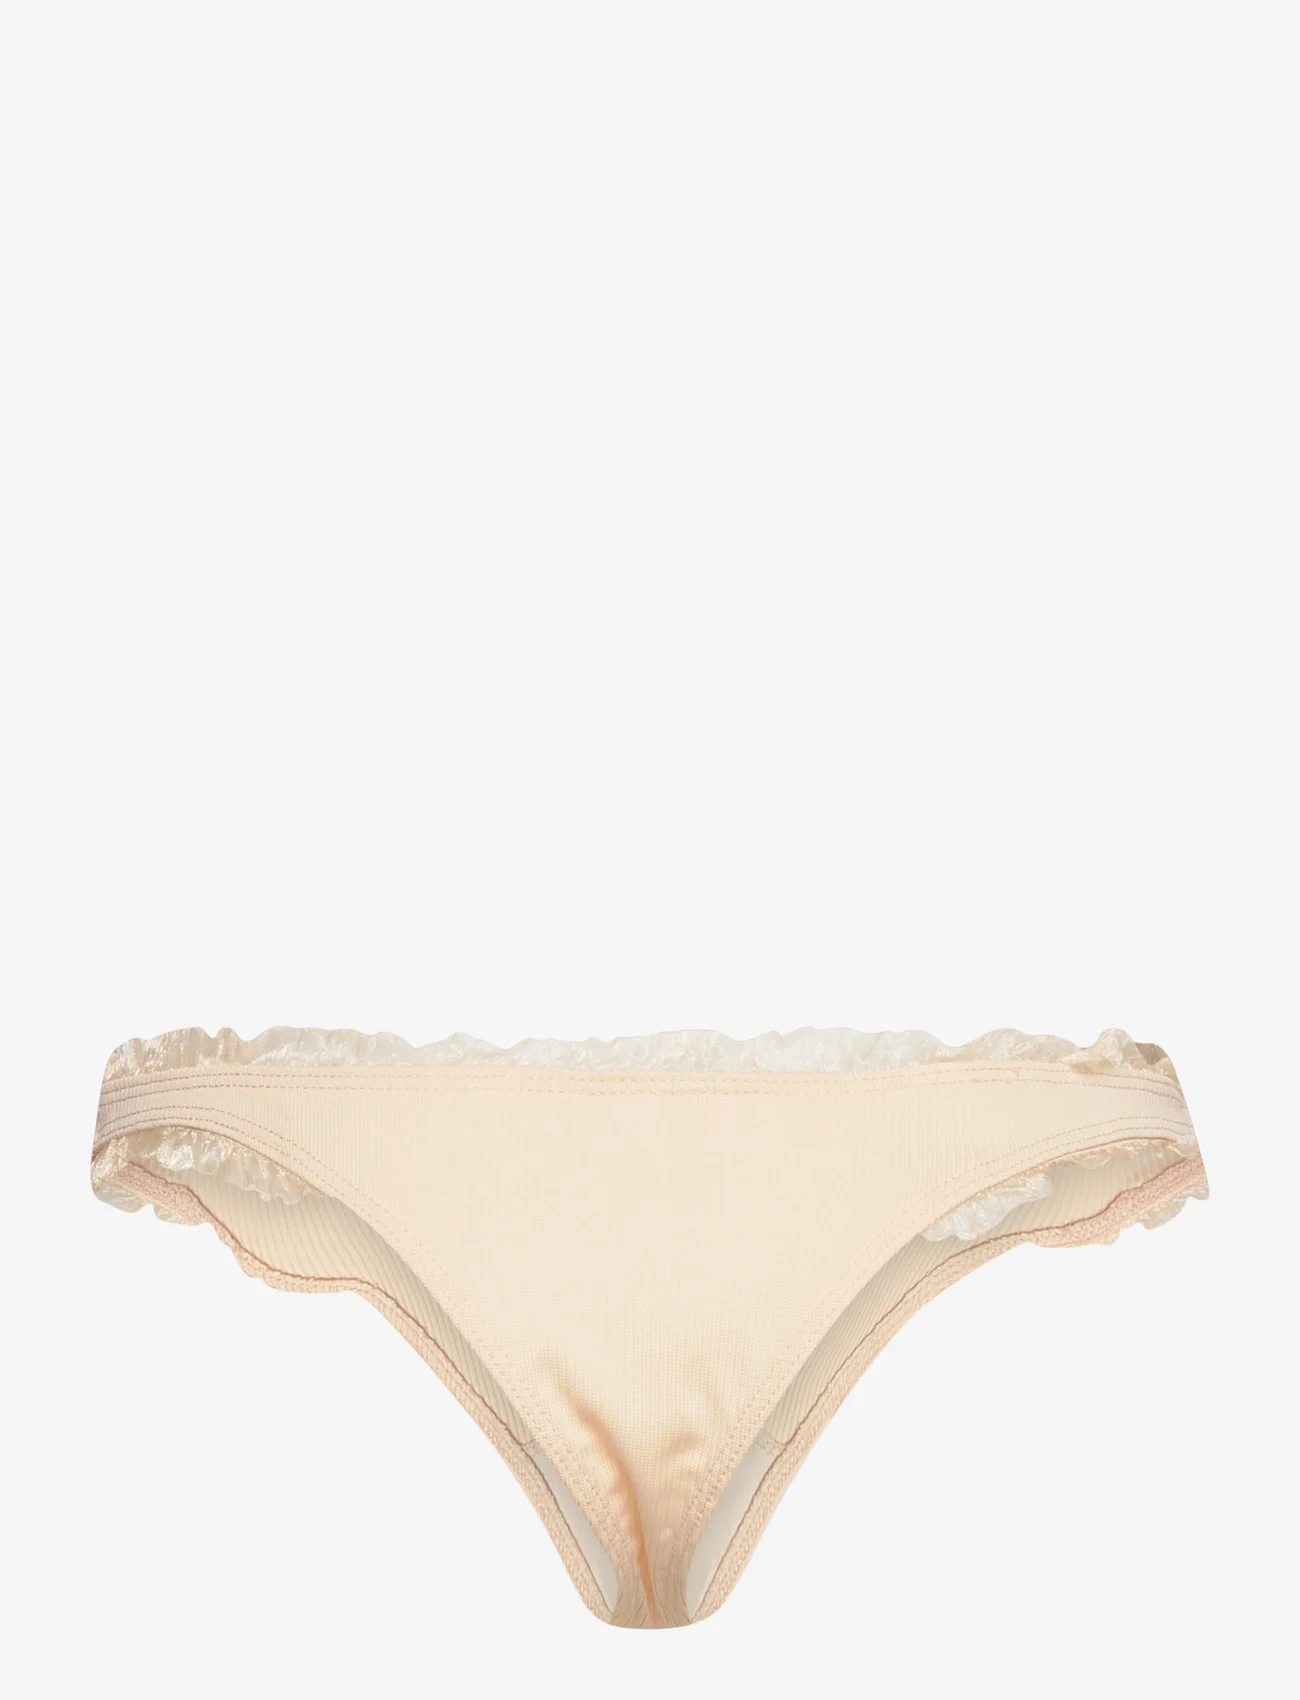 OW Collection - LUCKY Thong - najniższe ceny - light beige - 1